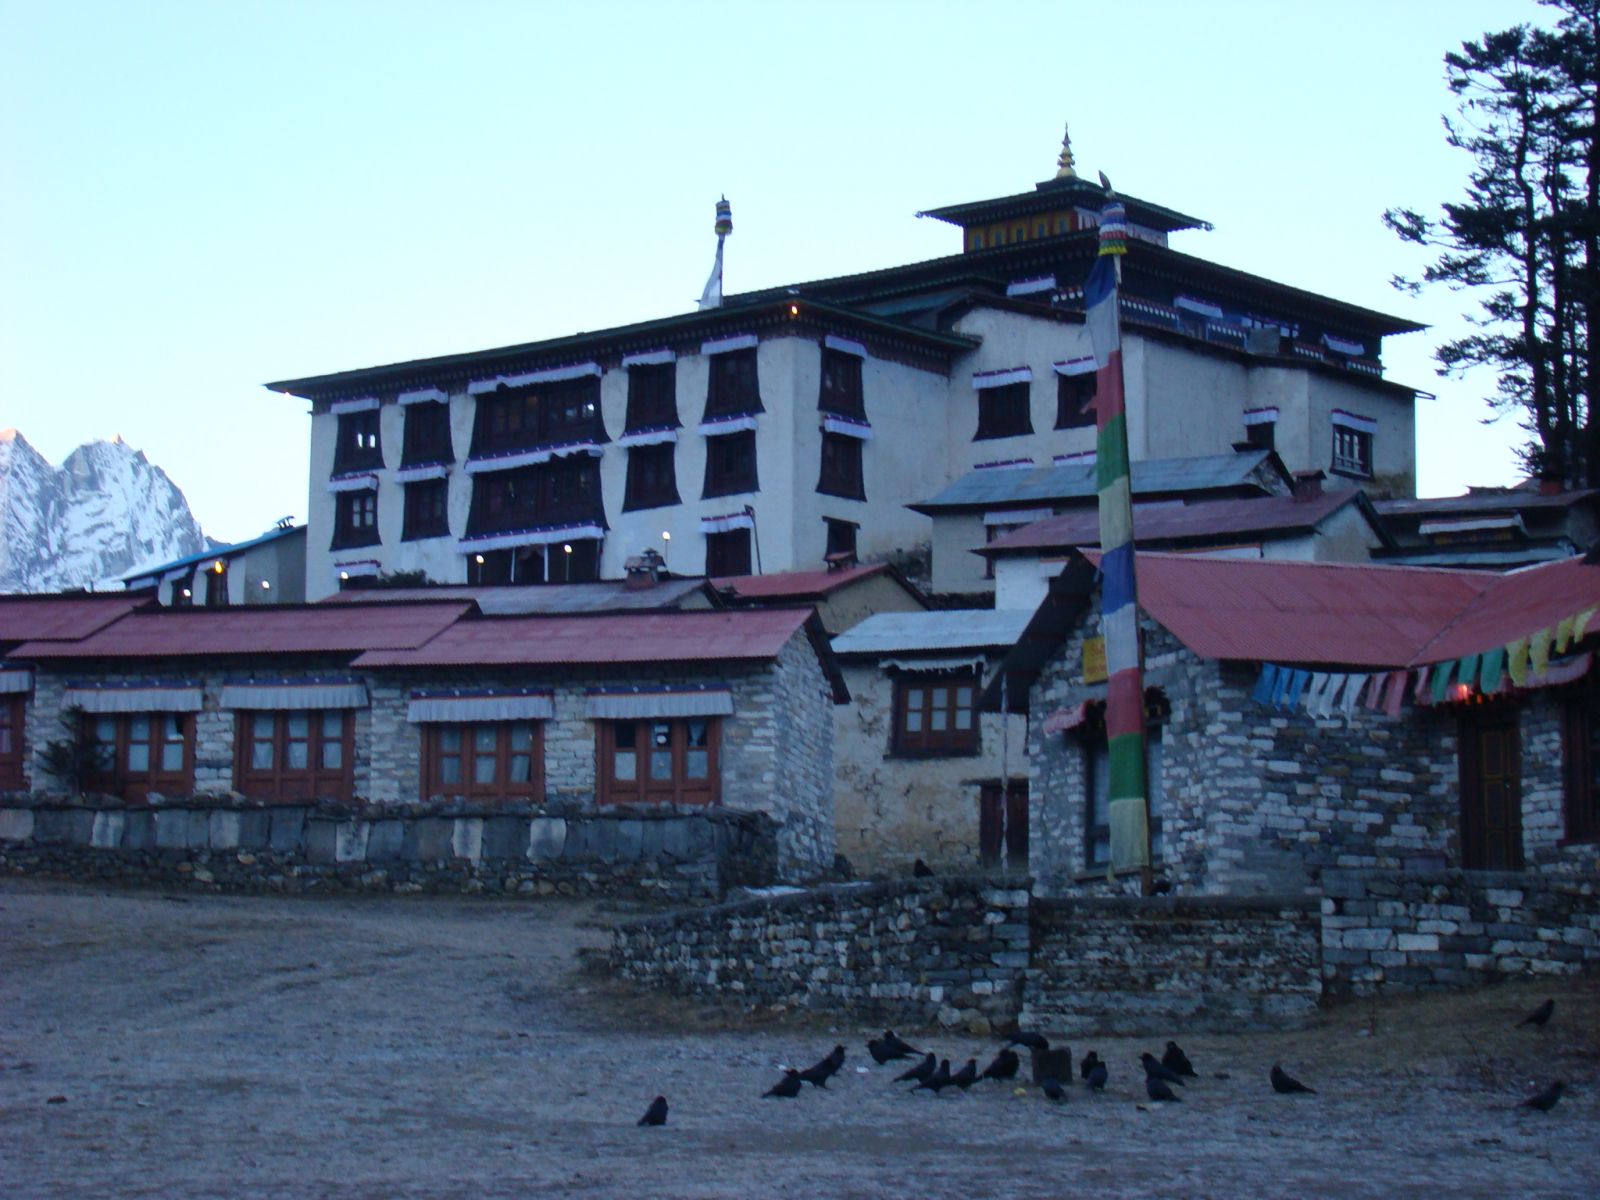 Buddhist Monastery in the Everest